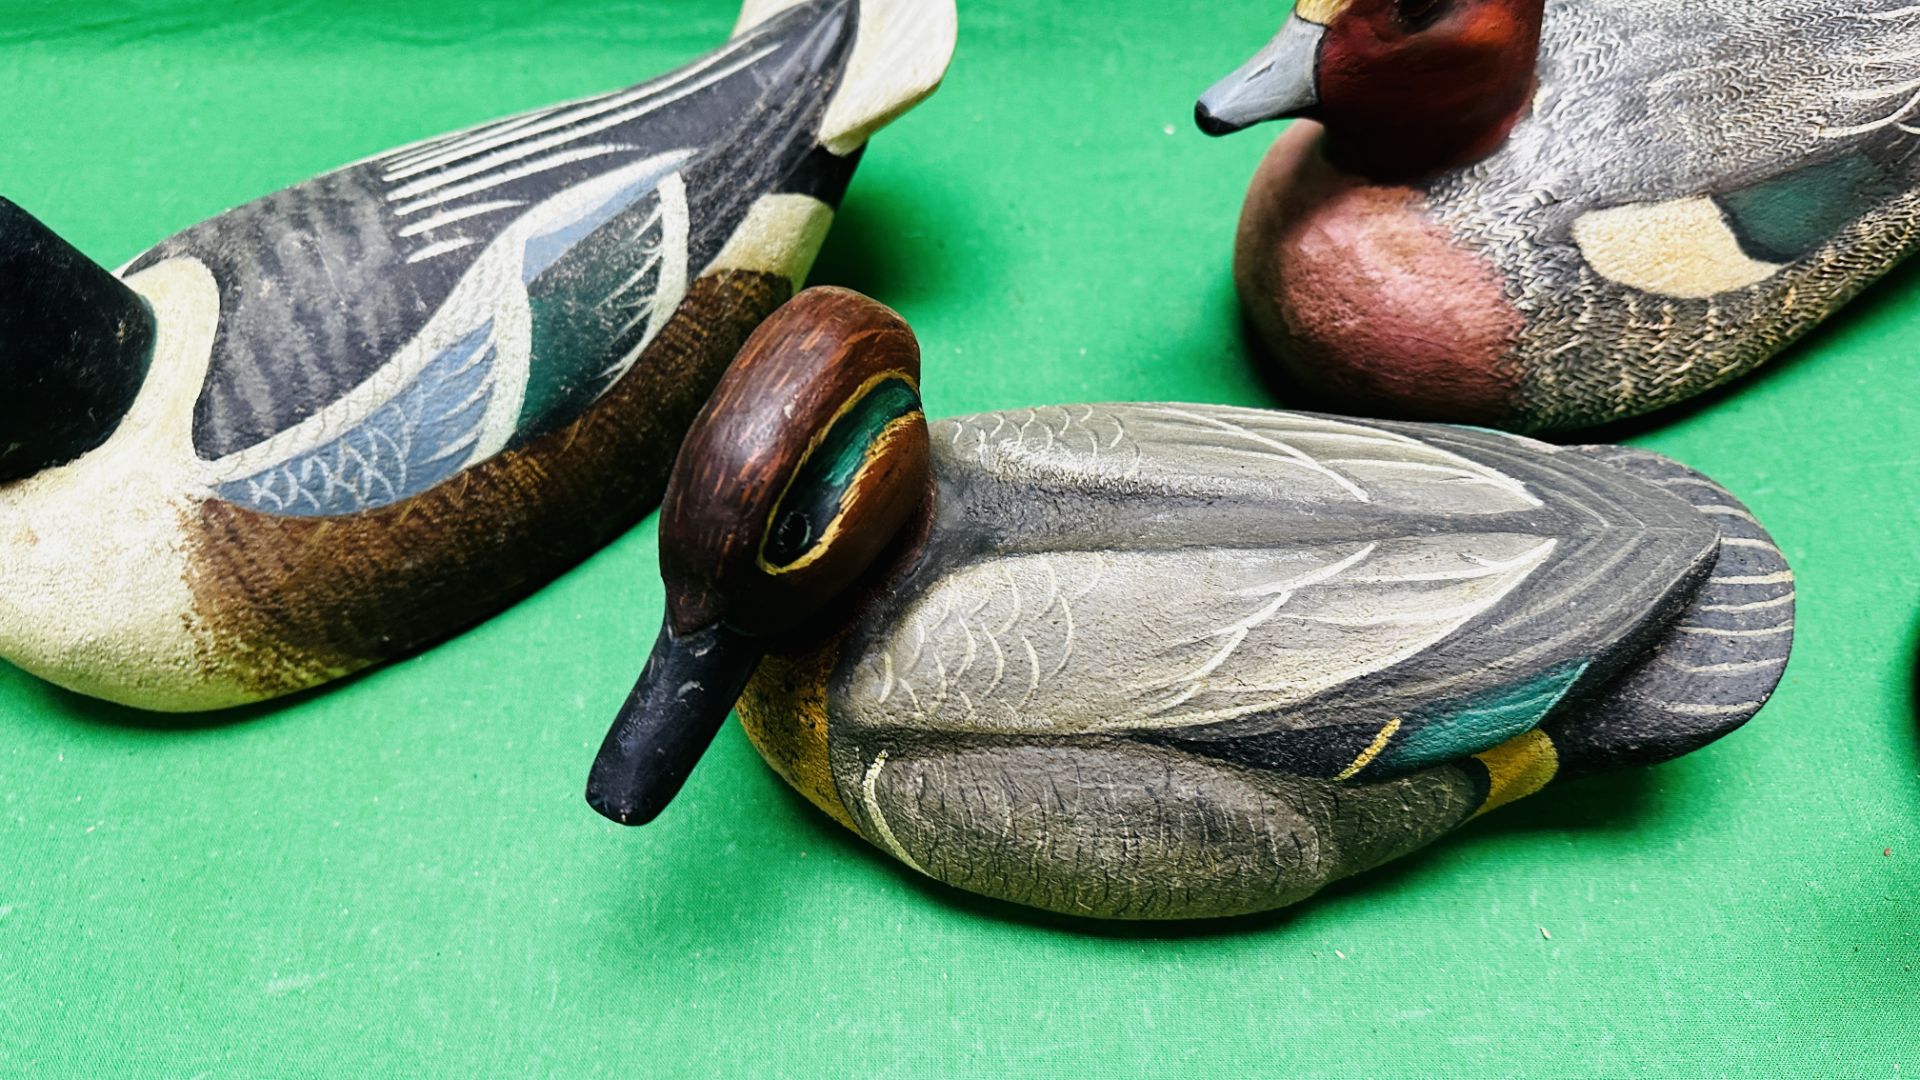 A HANDCRAFTED SET OF 4 DUCK DECOYS HAVING HANDPAINTED DETAIL AND GLASS EYES. - Image 9 of 13